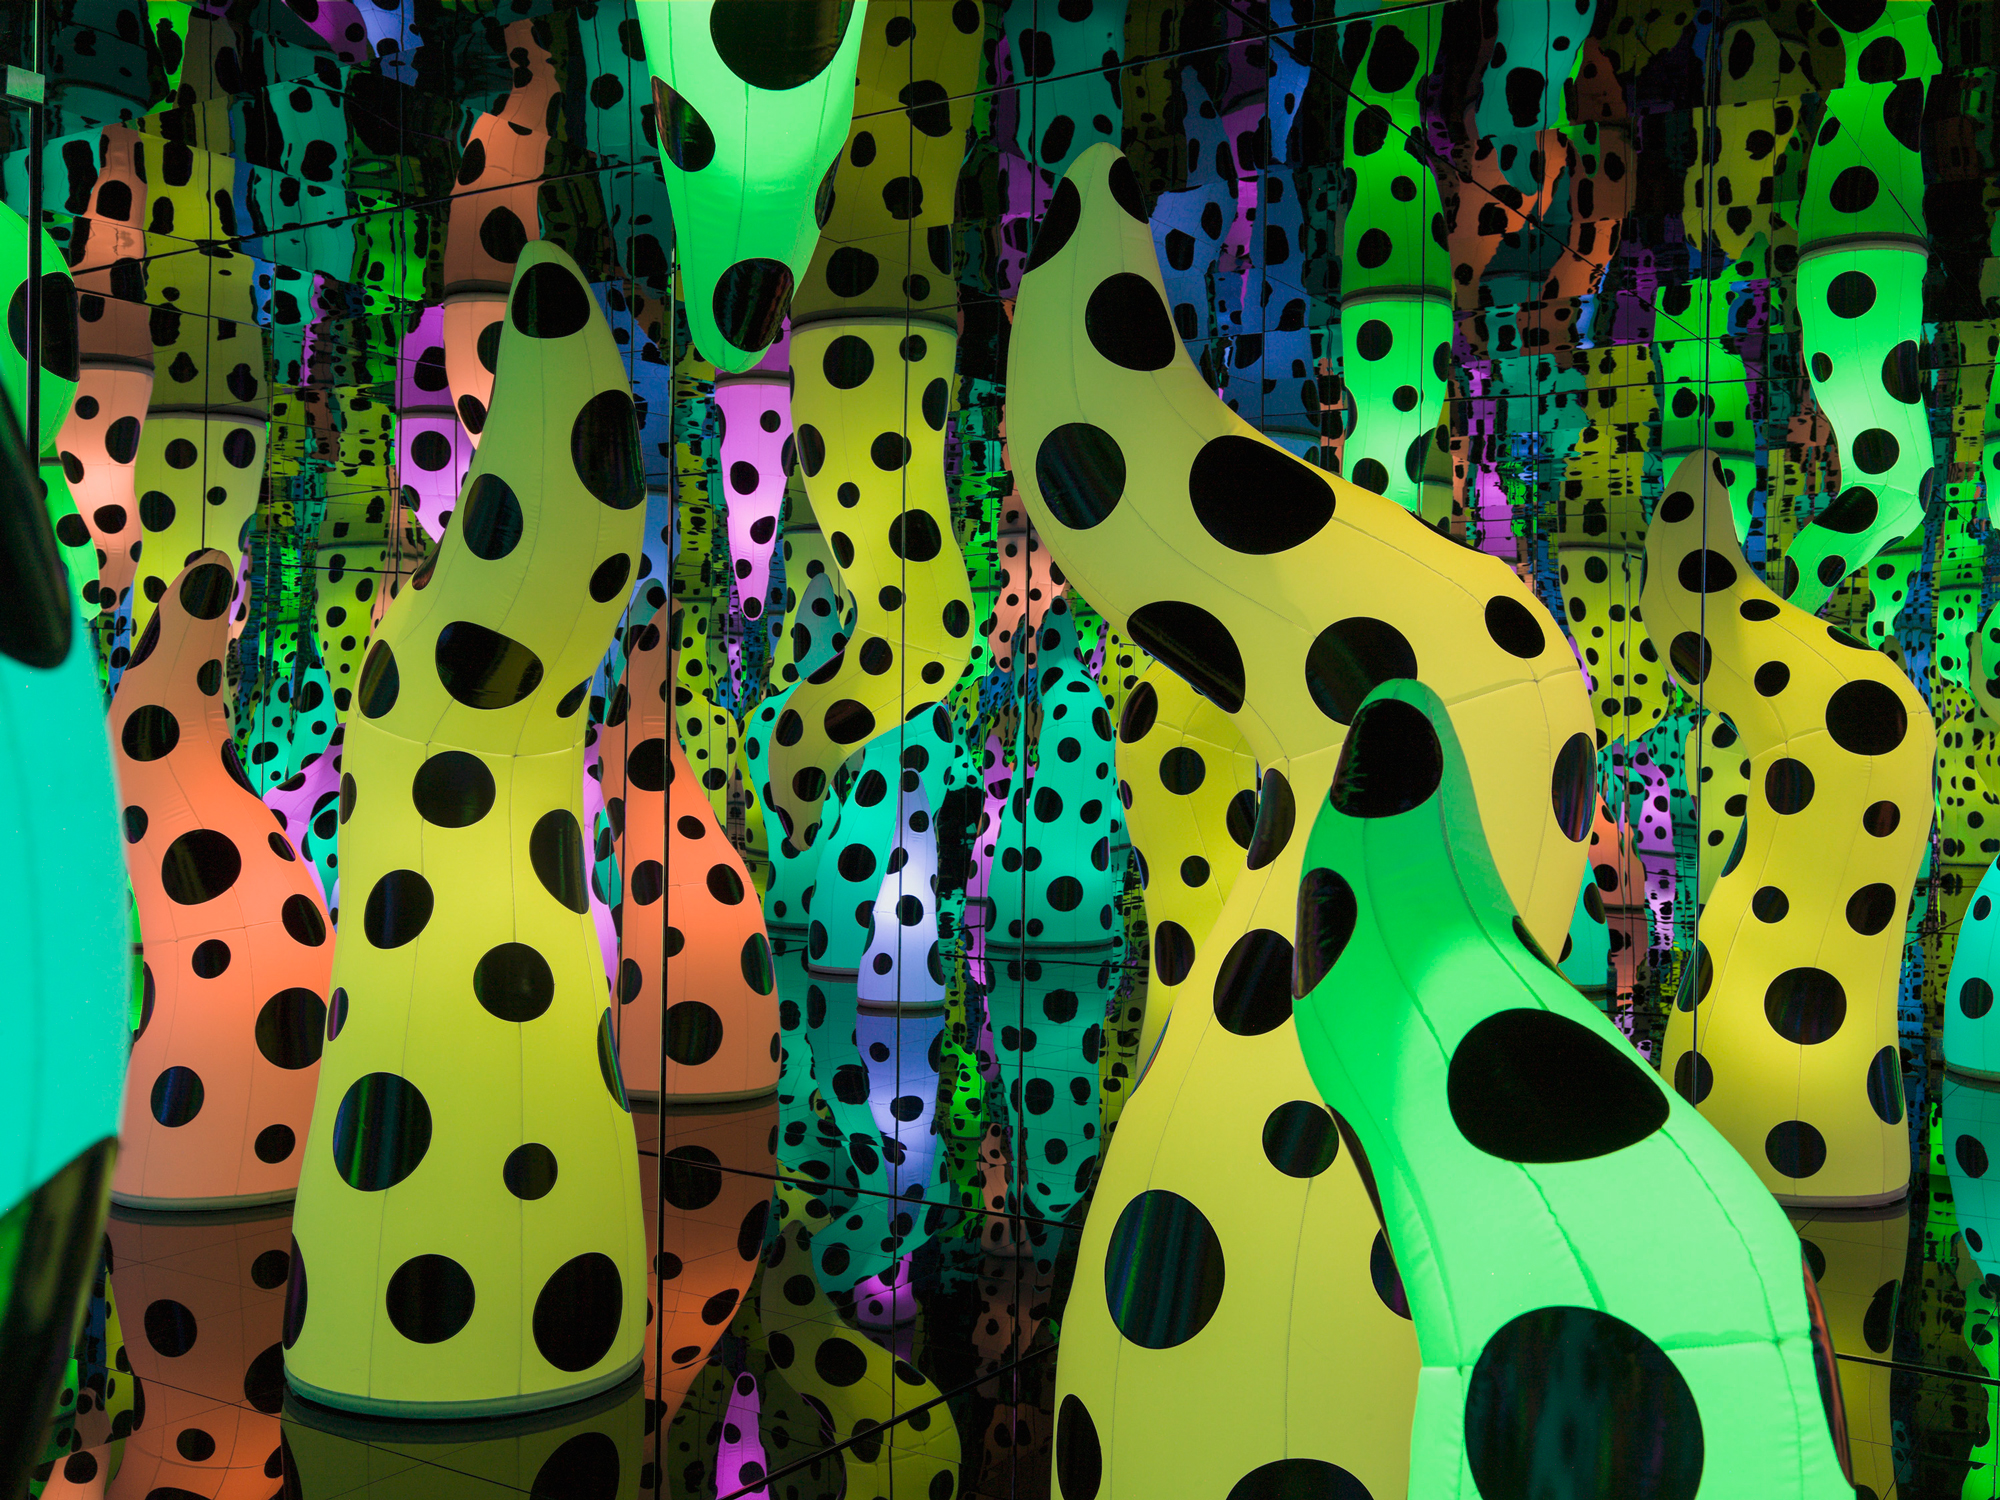 Mirrored room filled with inflated colorful tentacle shapes covered in black polka dots